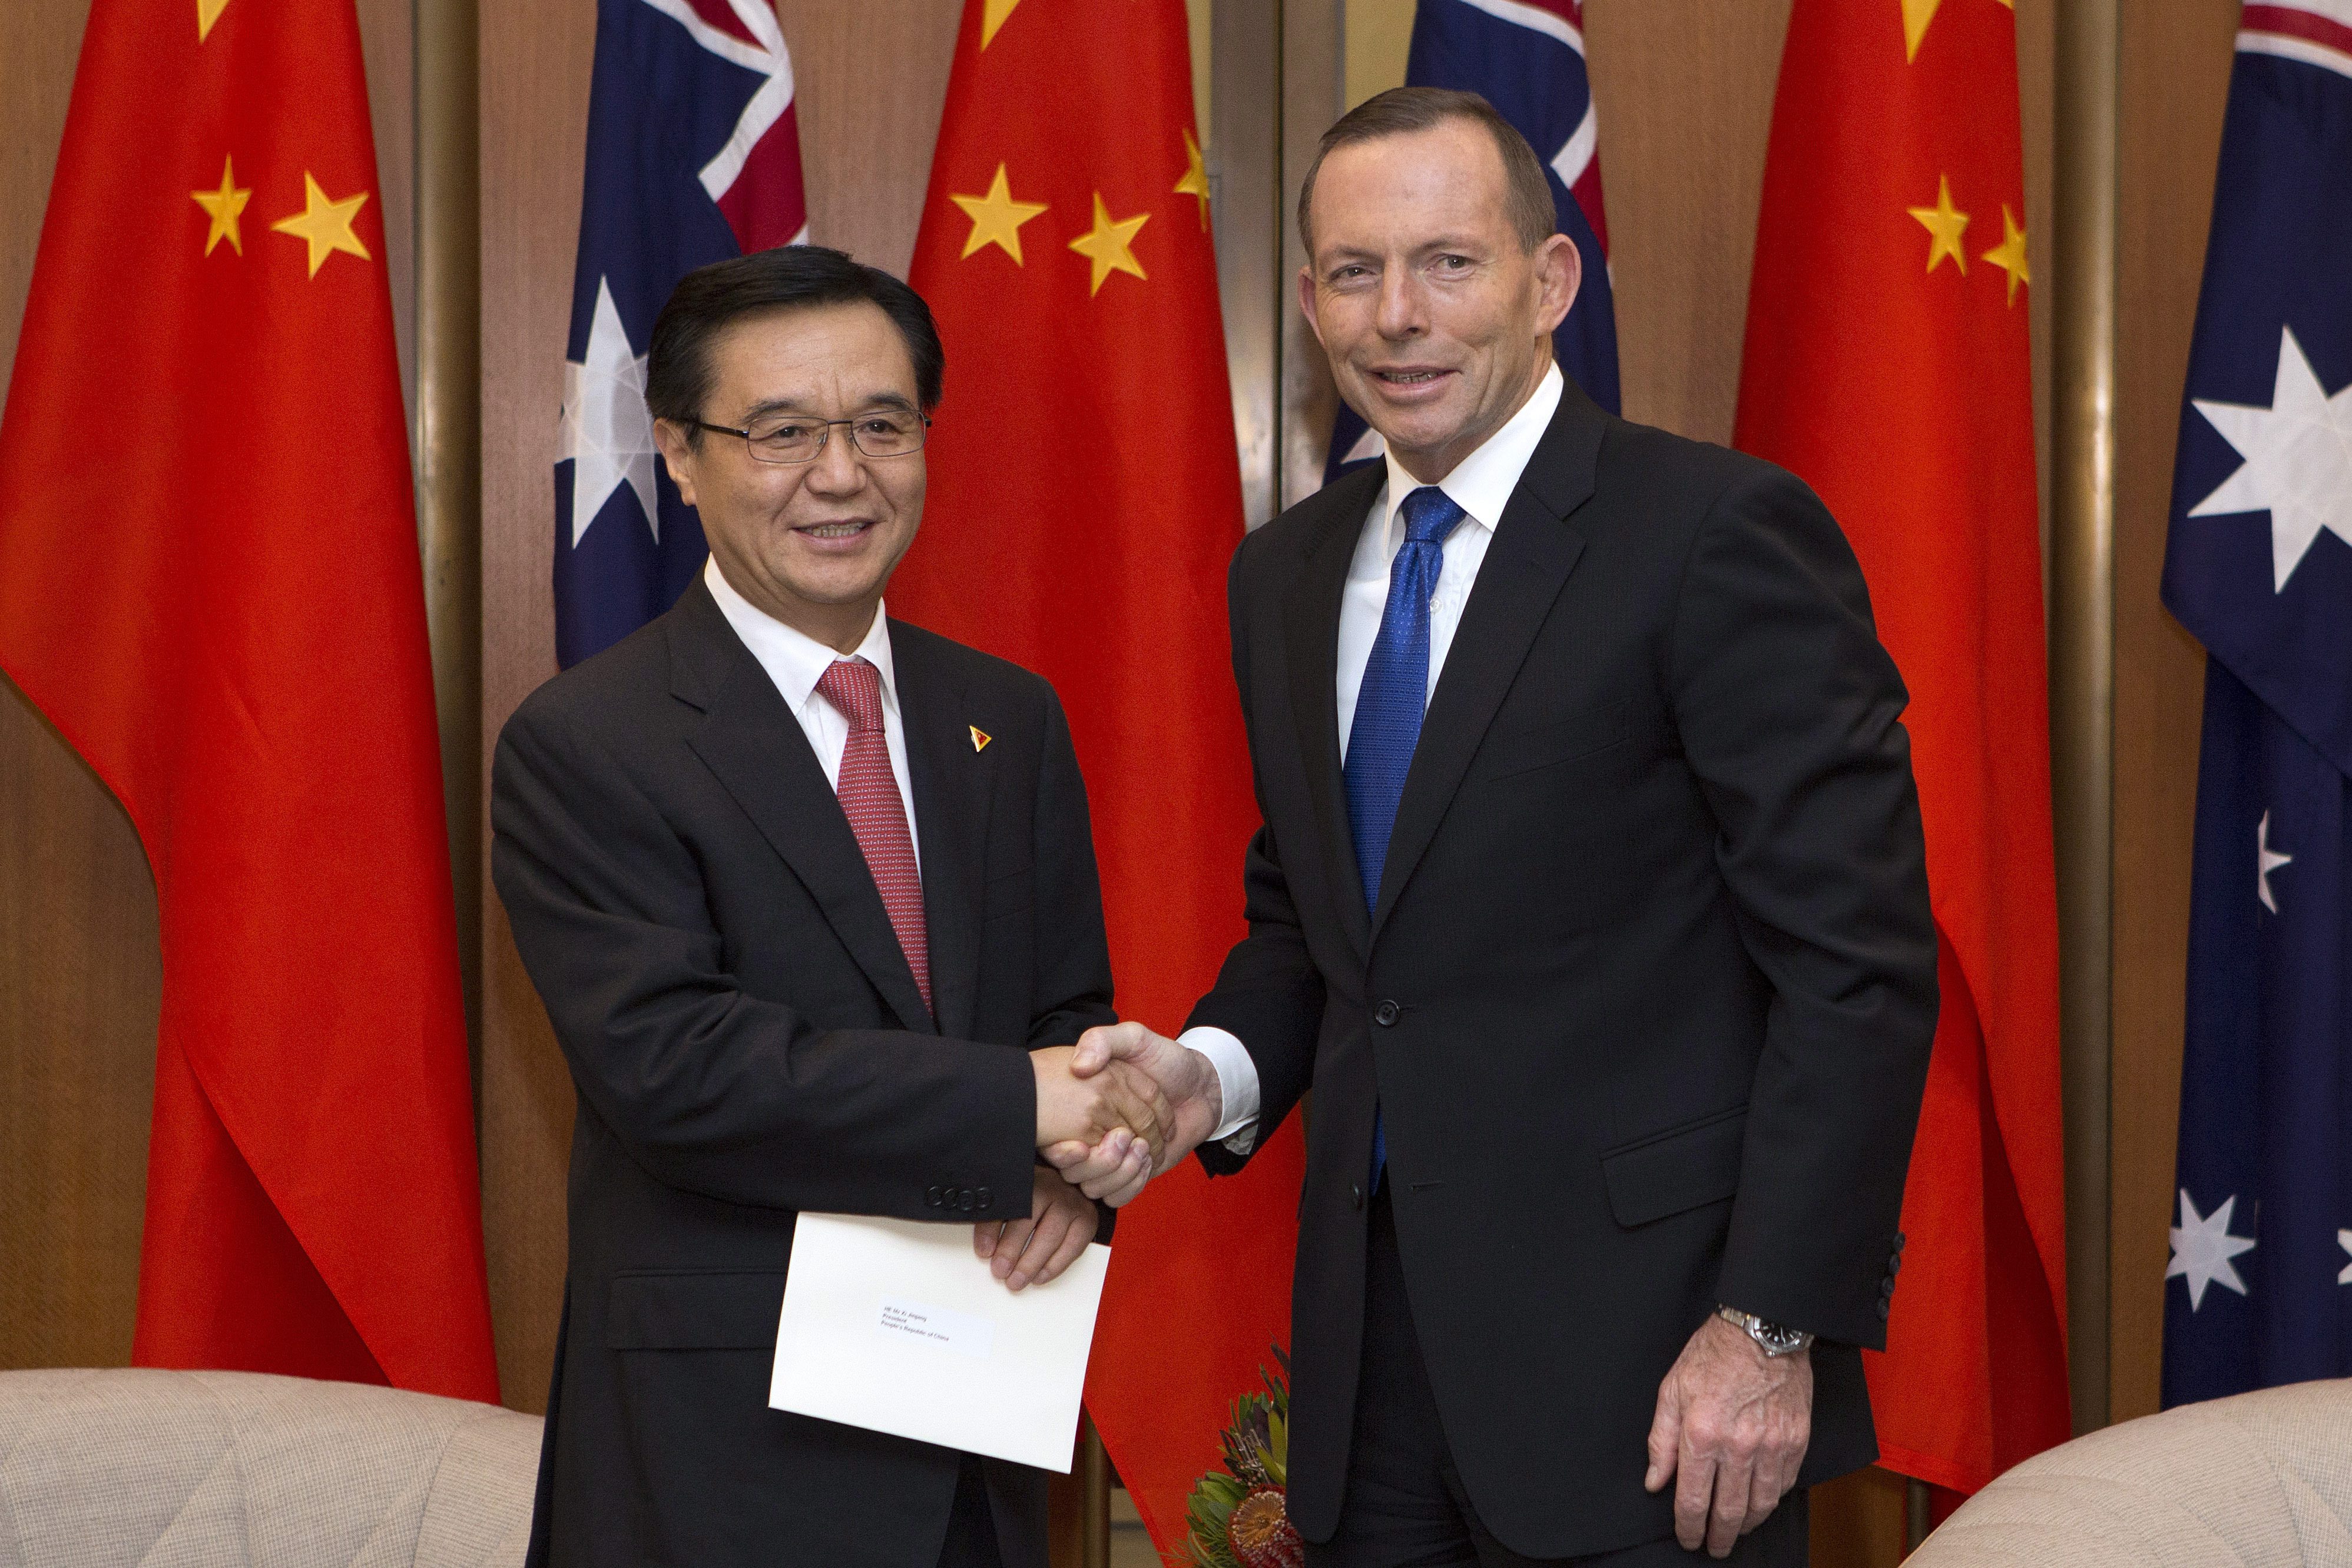 Australian Prime Minister Tony Abbott shakes hands with China's Minister of Commerce Gao Hucheng at Parliament House in Canberra, Australia. Photo: EPA